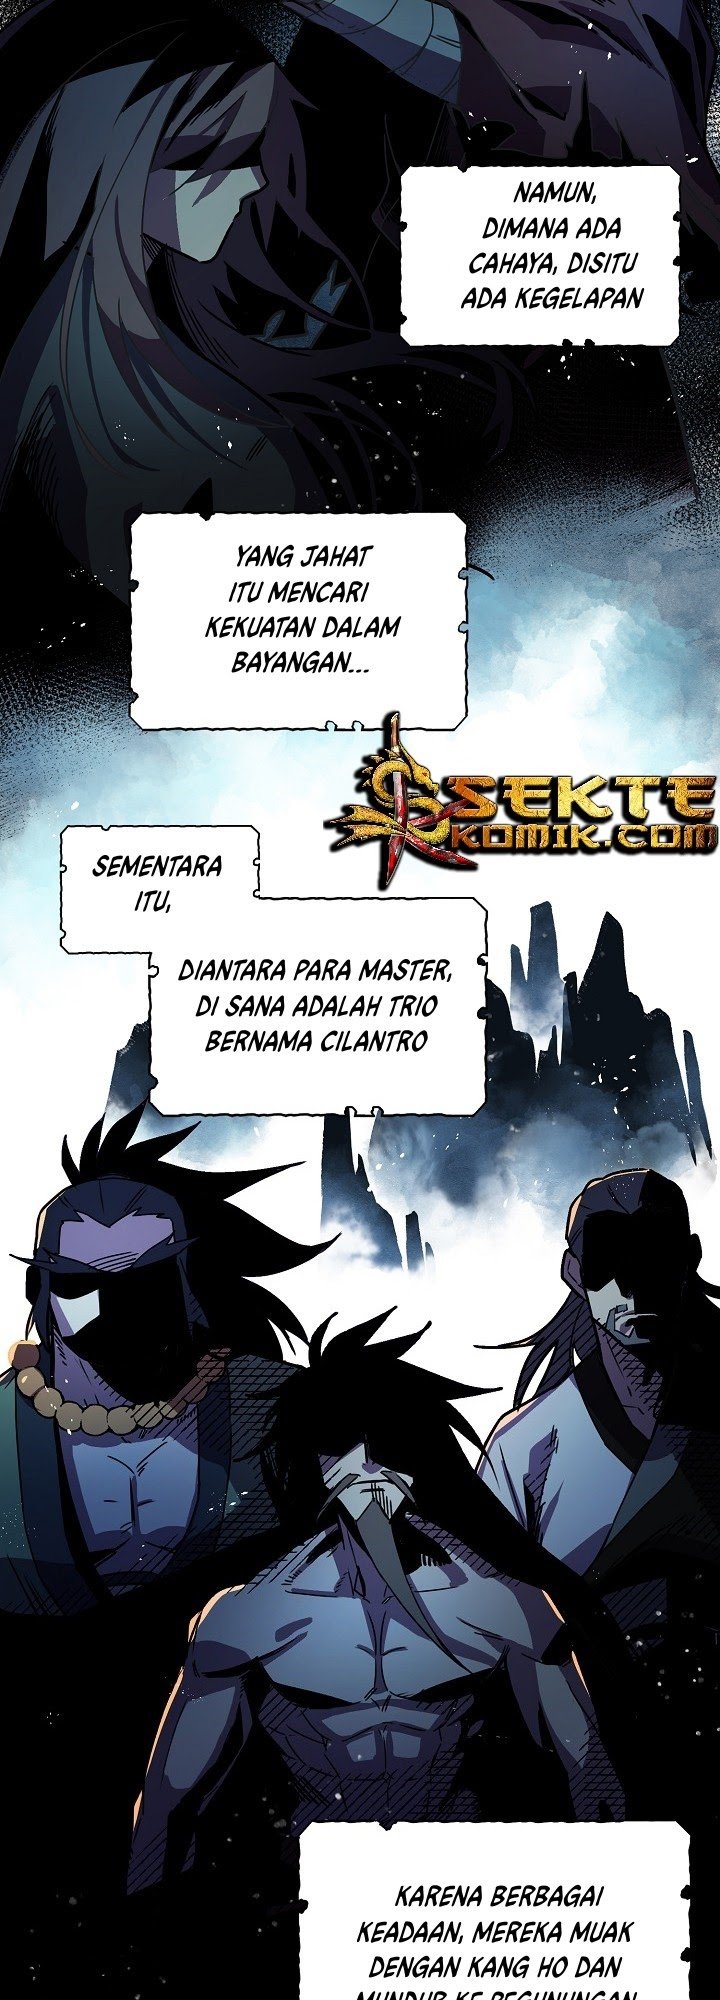 Absolute Martial Arts Chapter 01